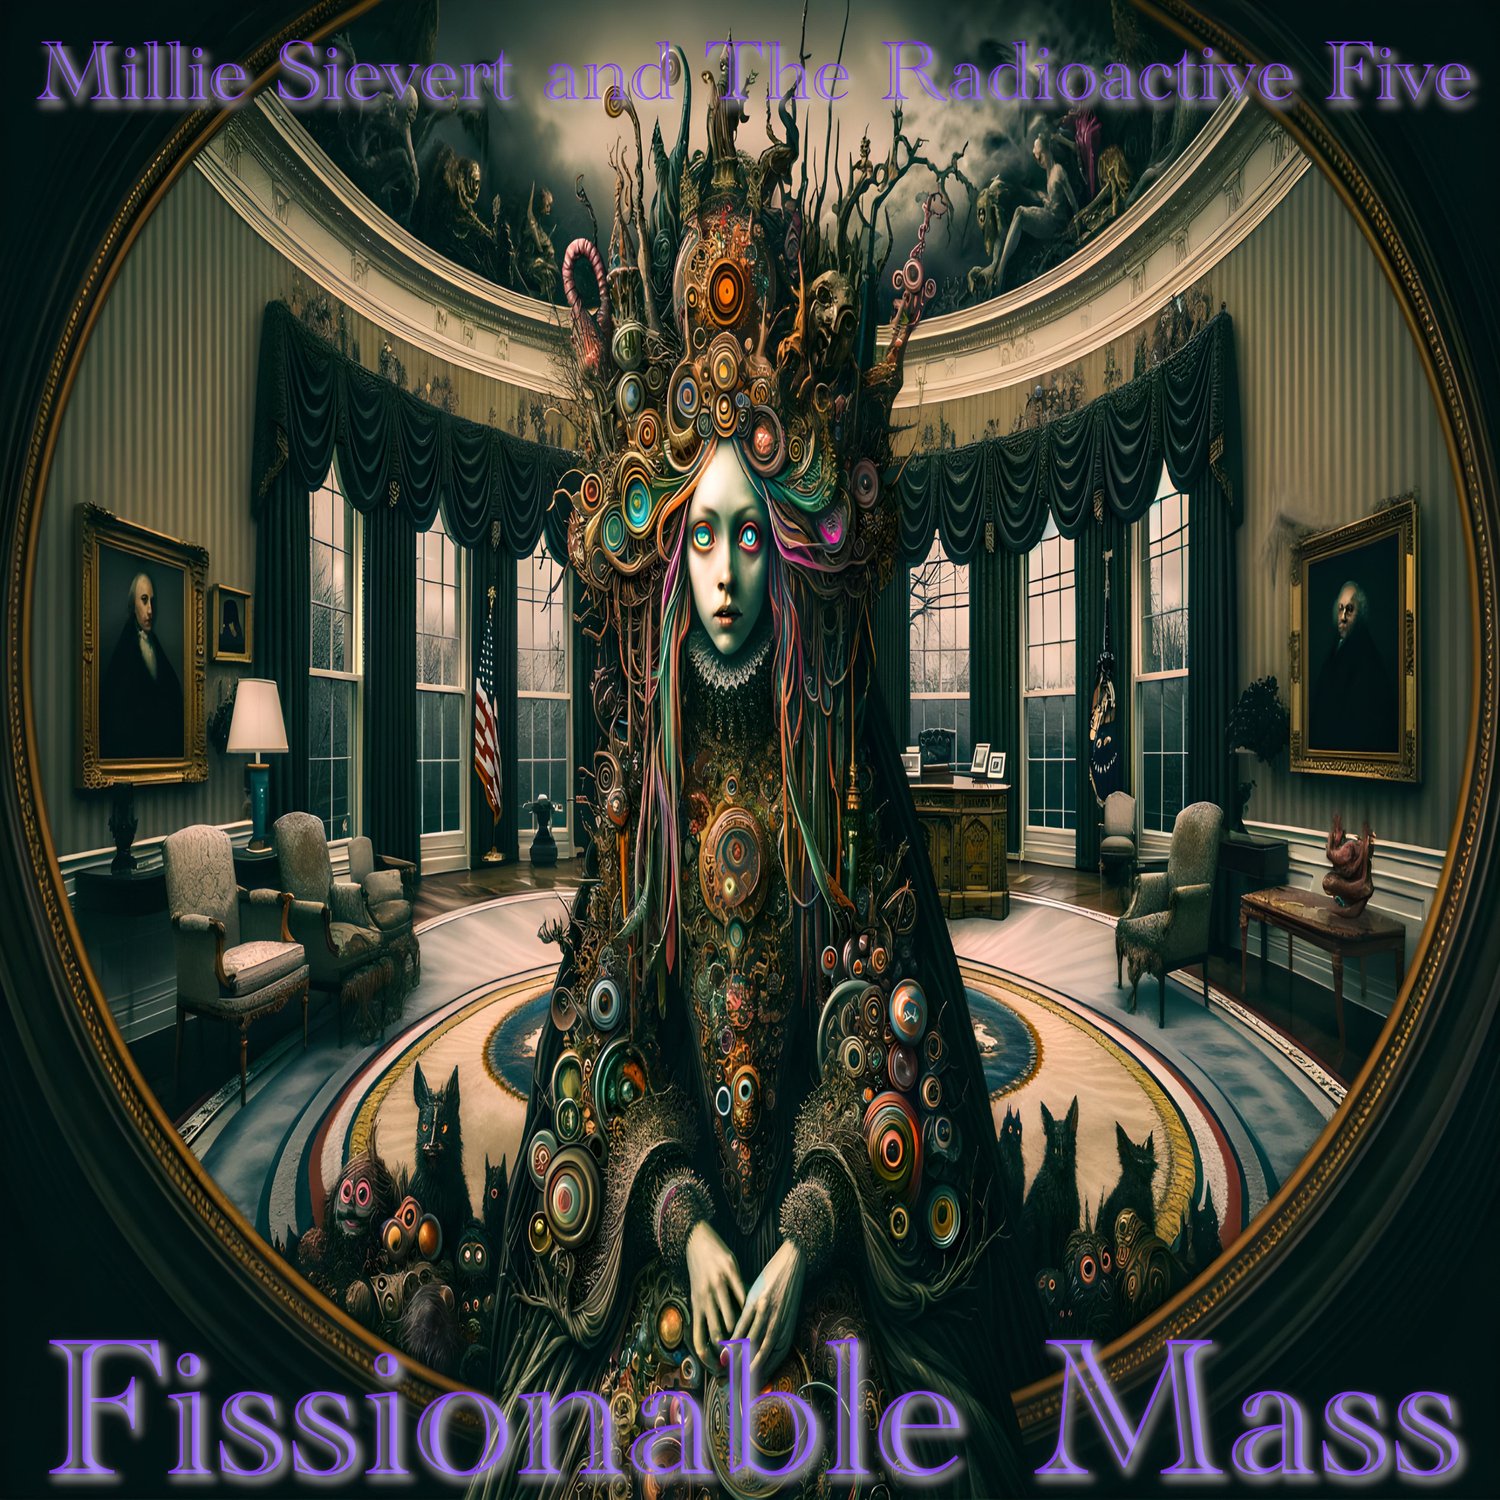 Millie Sievert and The Radioactive Five - Fissionable Mass